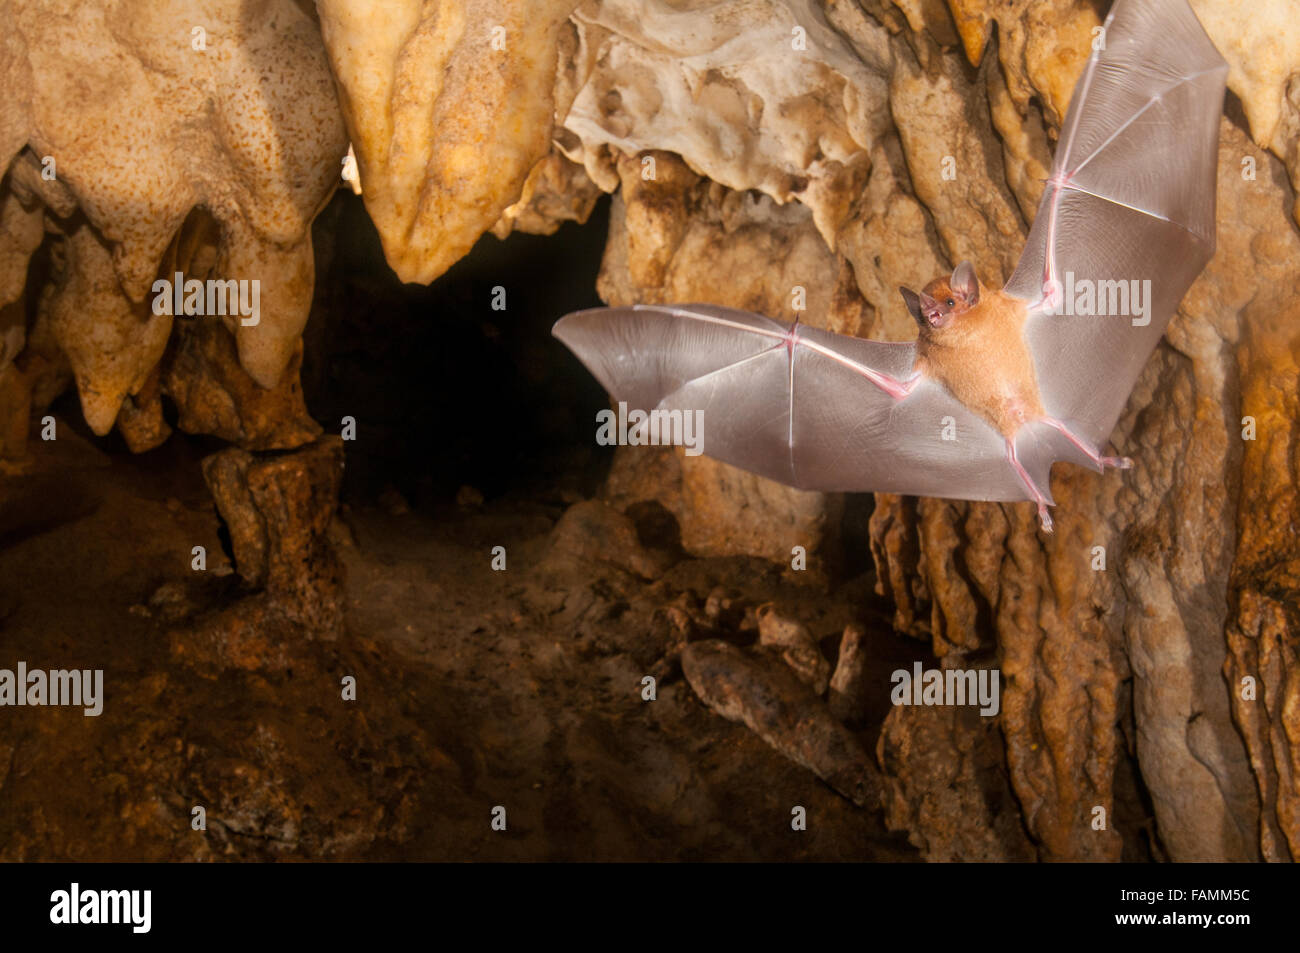 A fruit eating bat in flight spreads its wings inside a cave. Stock Photo